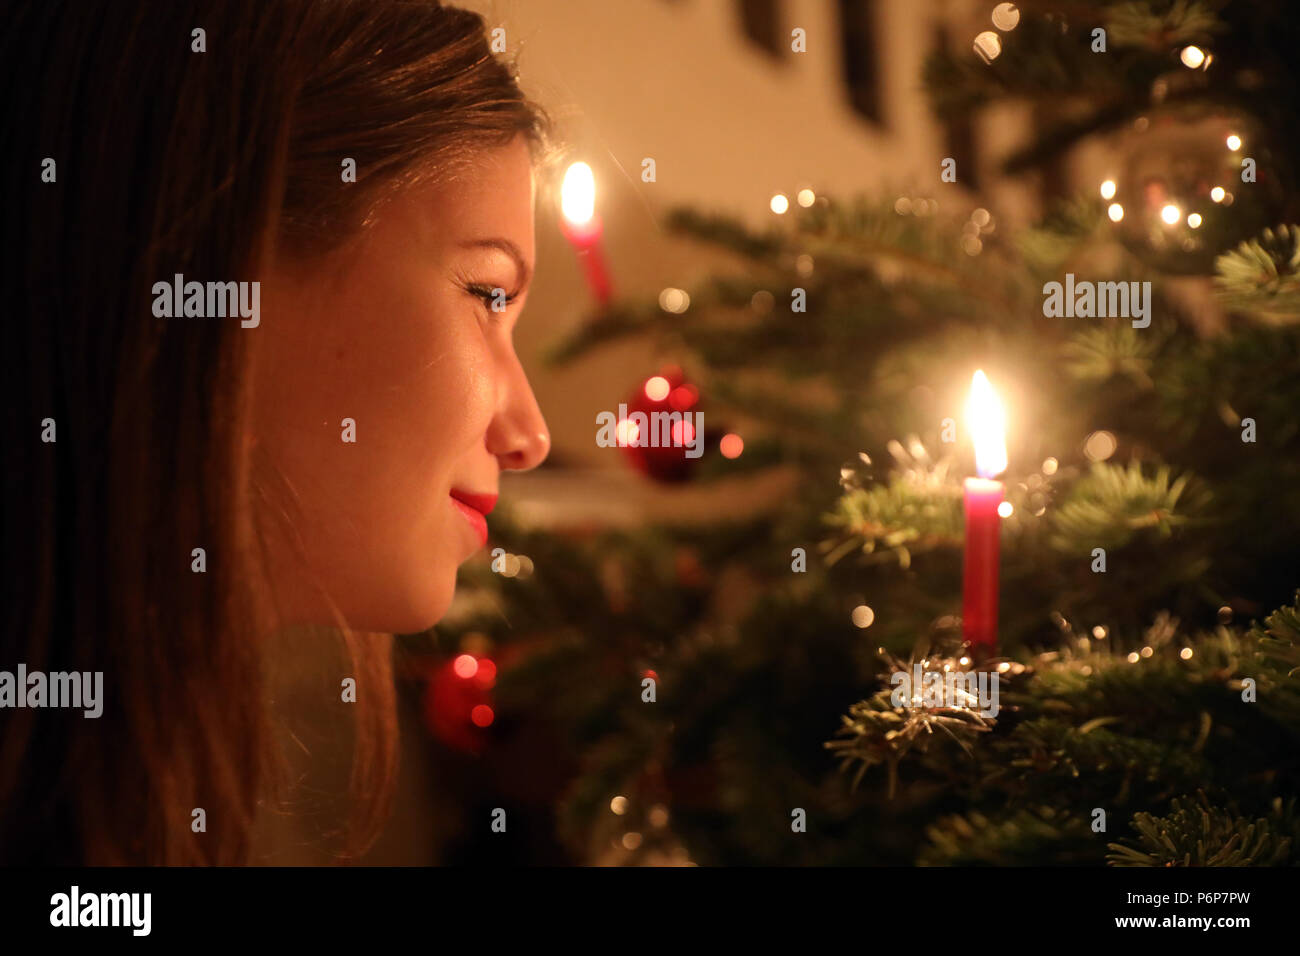 Girl looking at a candle on a Christmas tree.  Geneva. Switzerland. Stock Photo